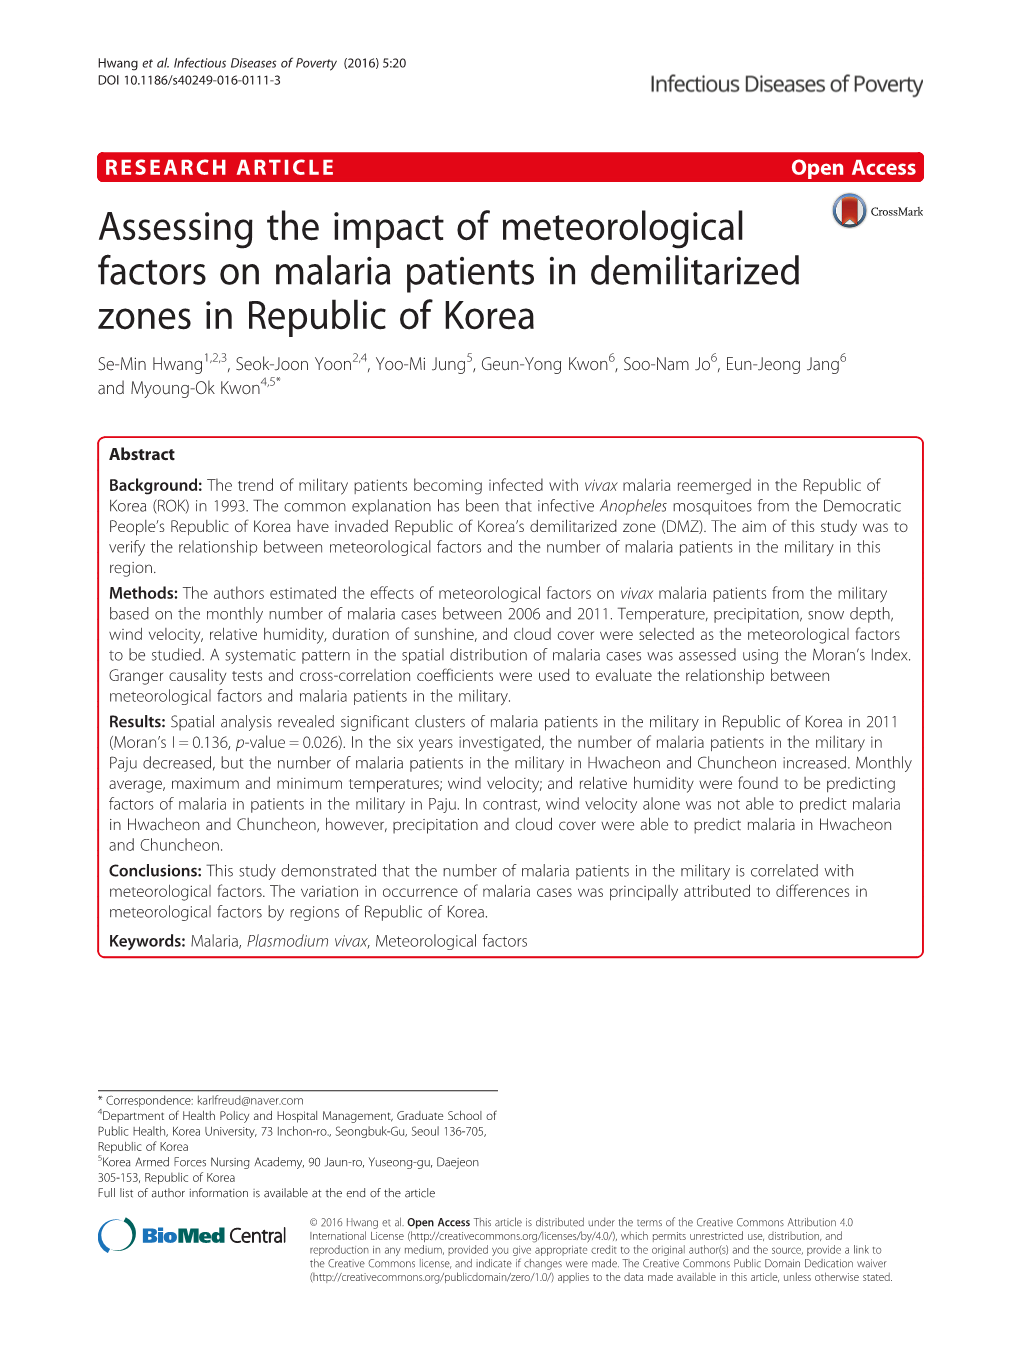 Assessing the Impact of Meteorological Factors on Malaria